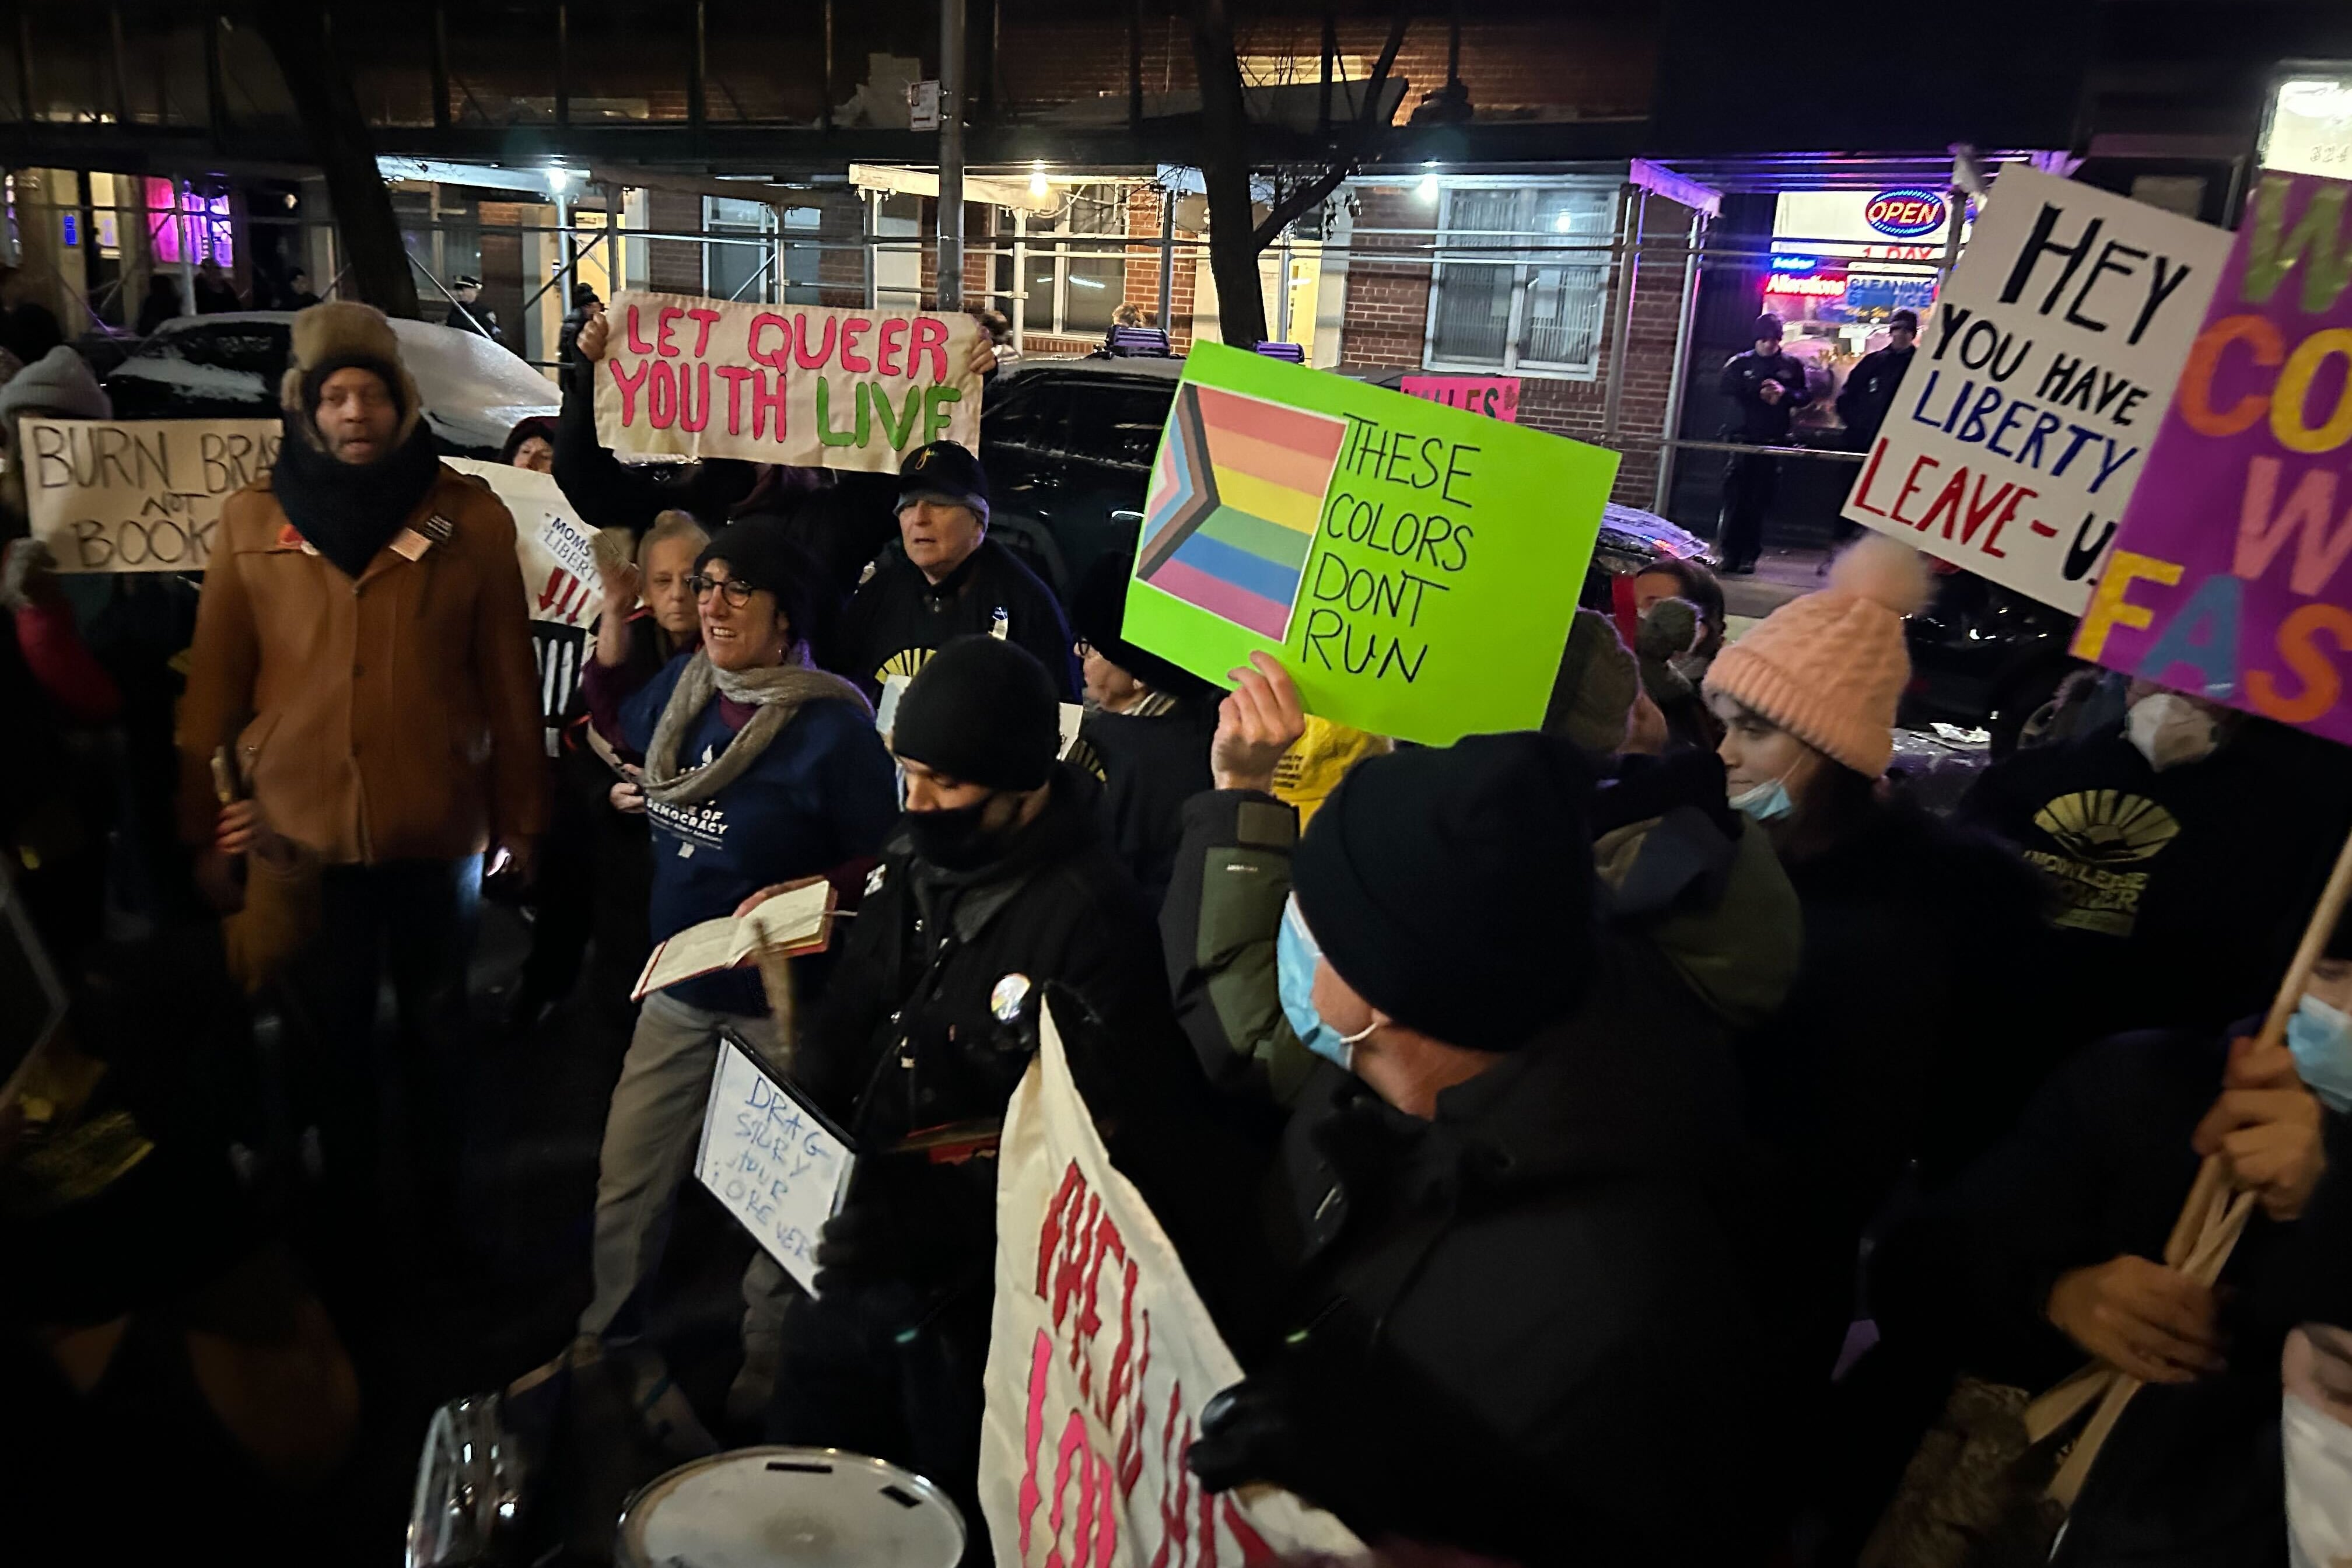 A group of protesters hold signs such as "Let queer youth live."